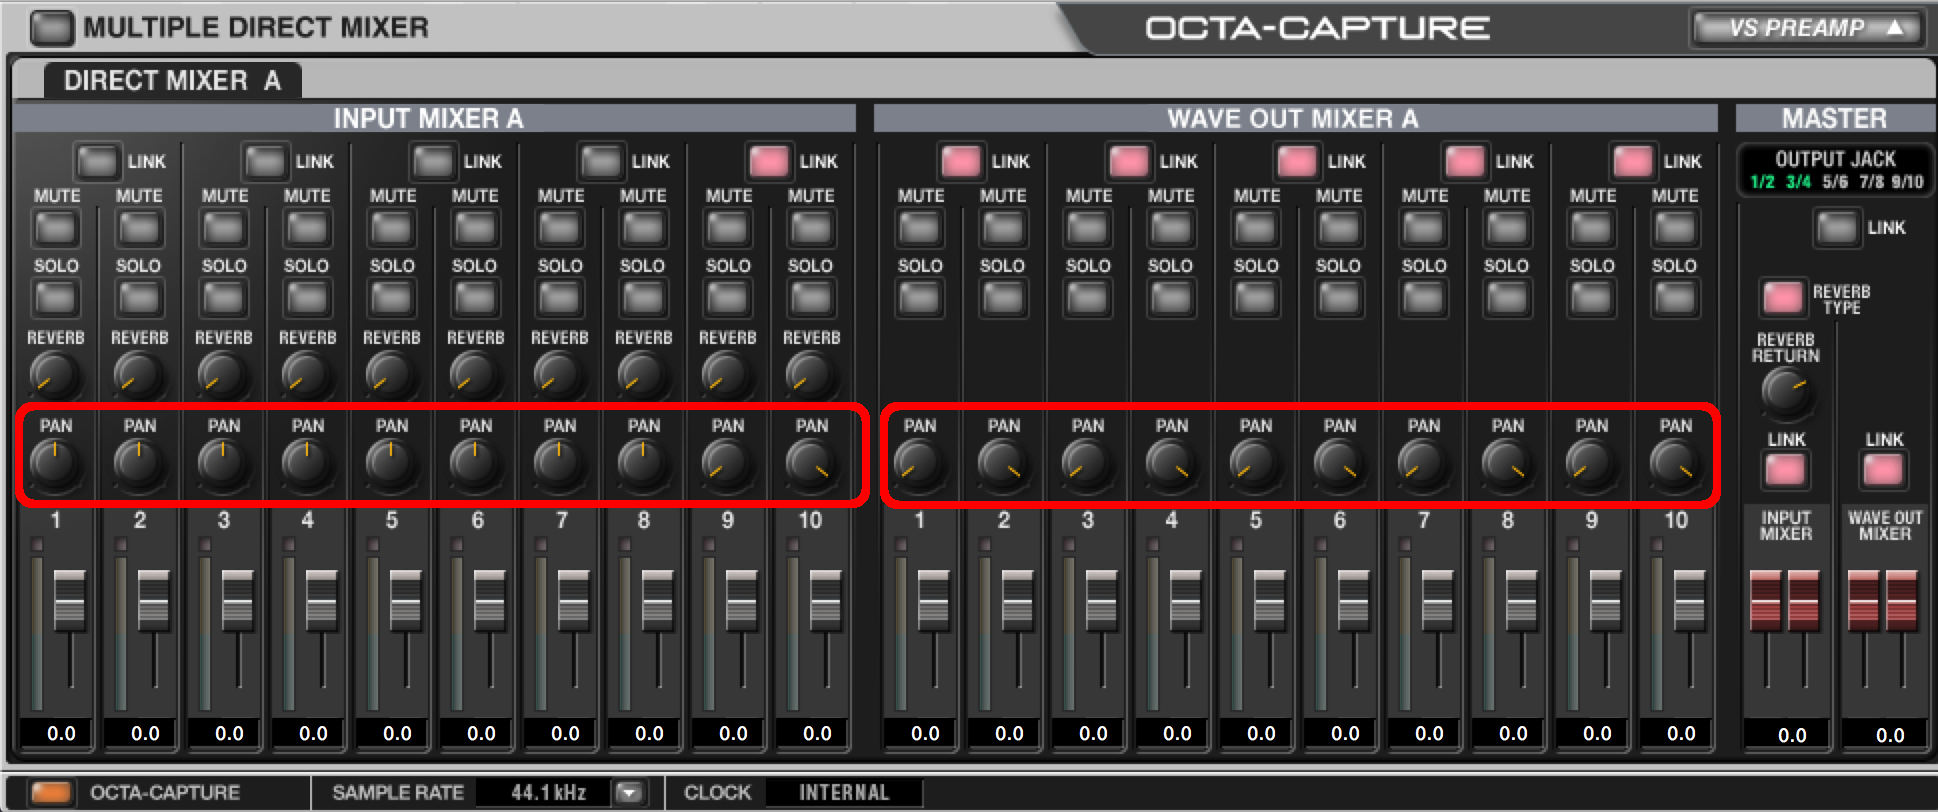 OCTA-CAPTURE, UA-1010: SYMPTOM: Sound is Only Output of the Left